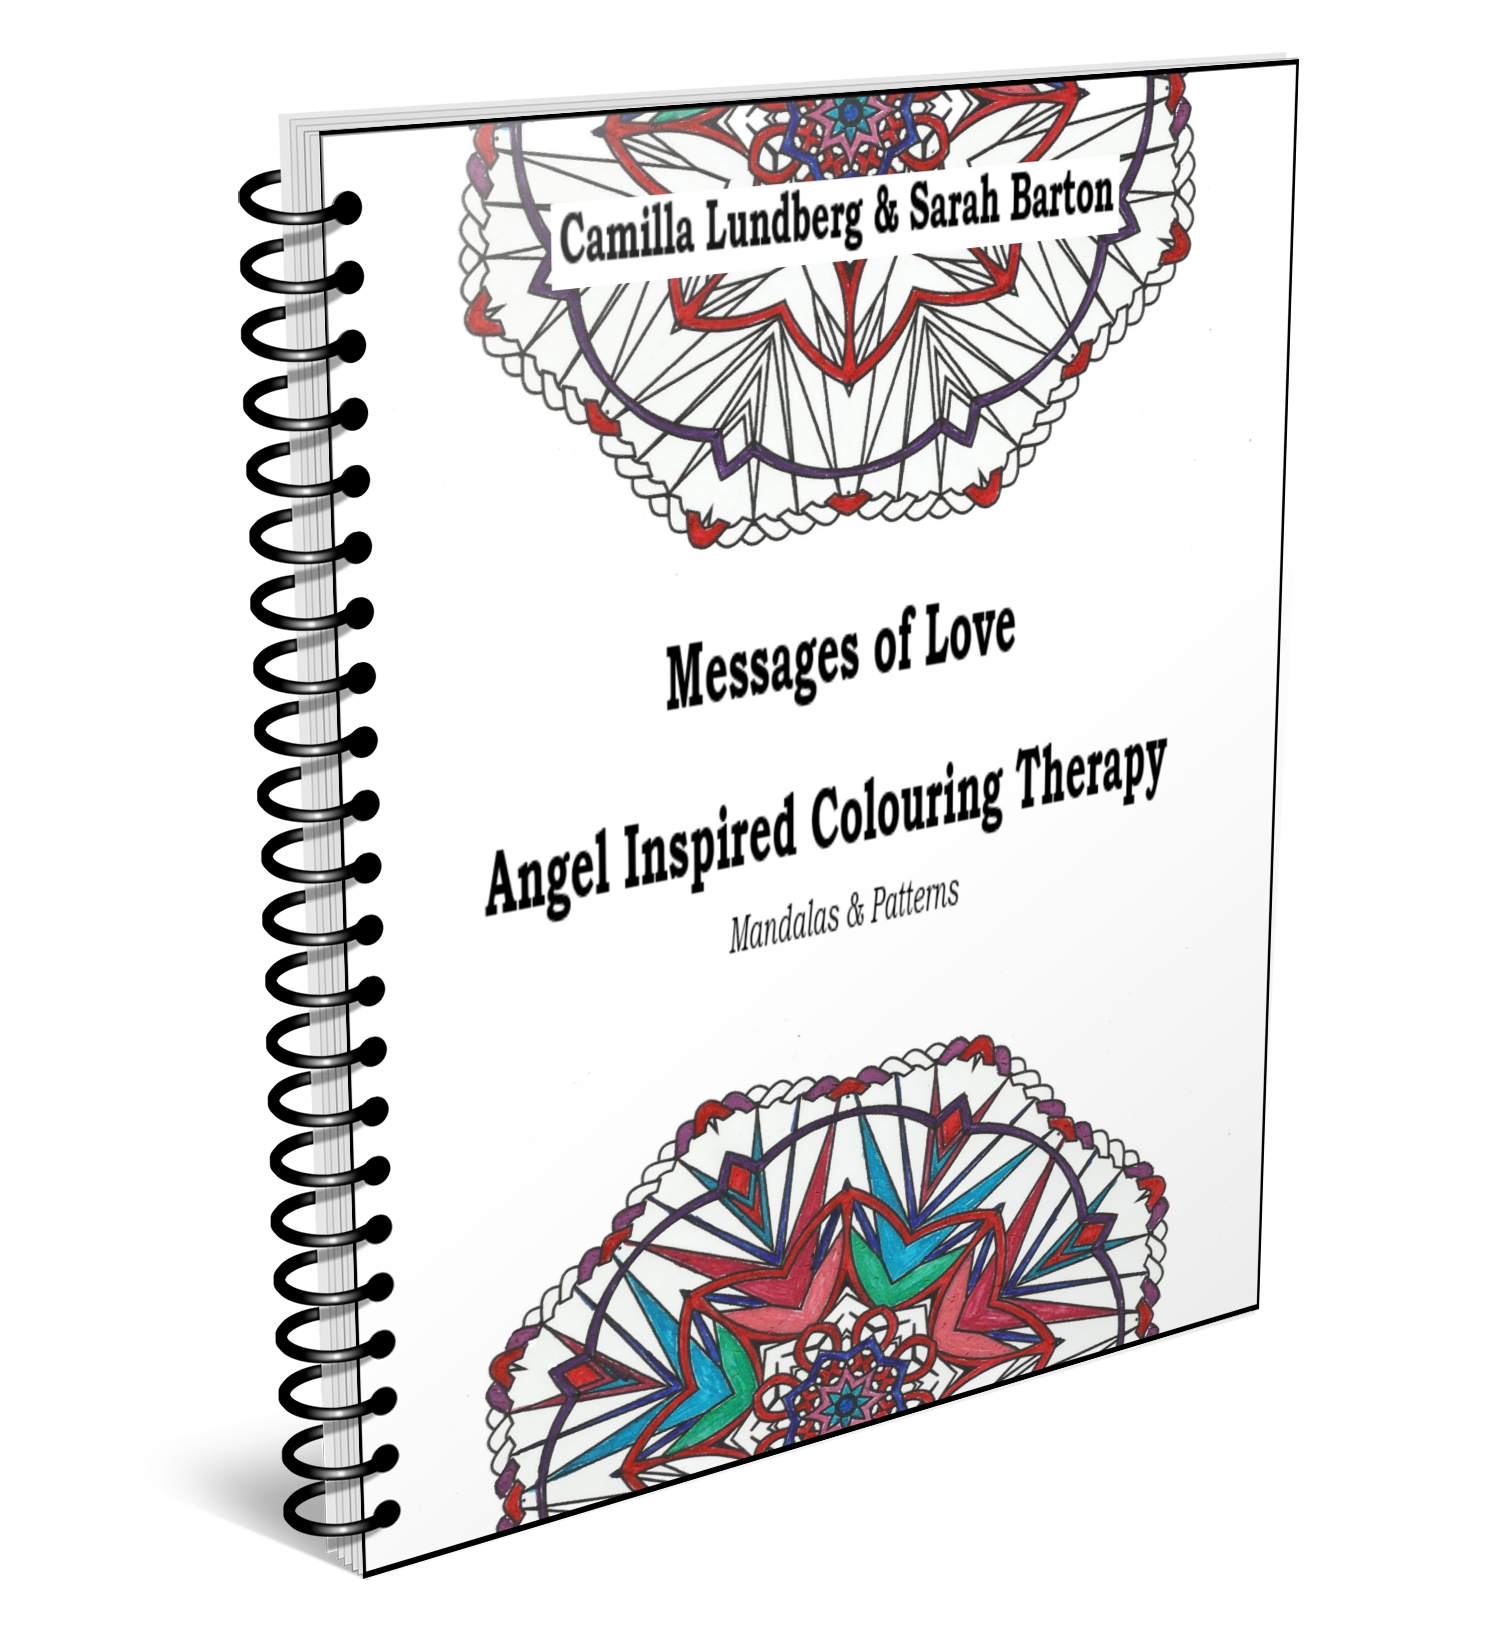 my messages of love angel inspired colouring therapy spiral bound version